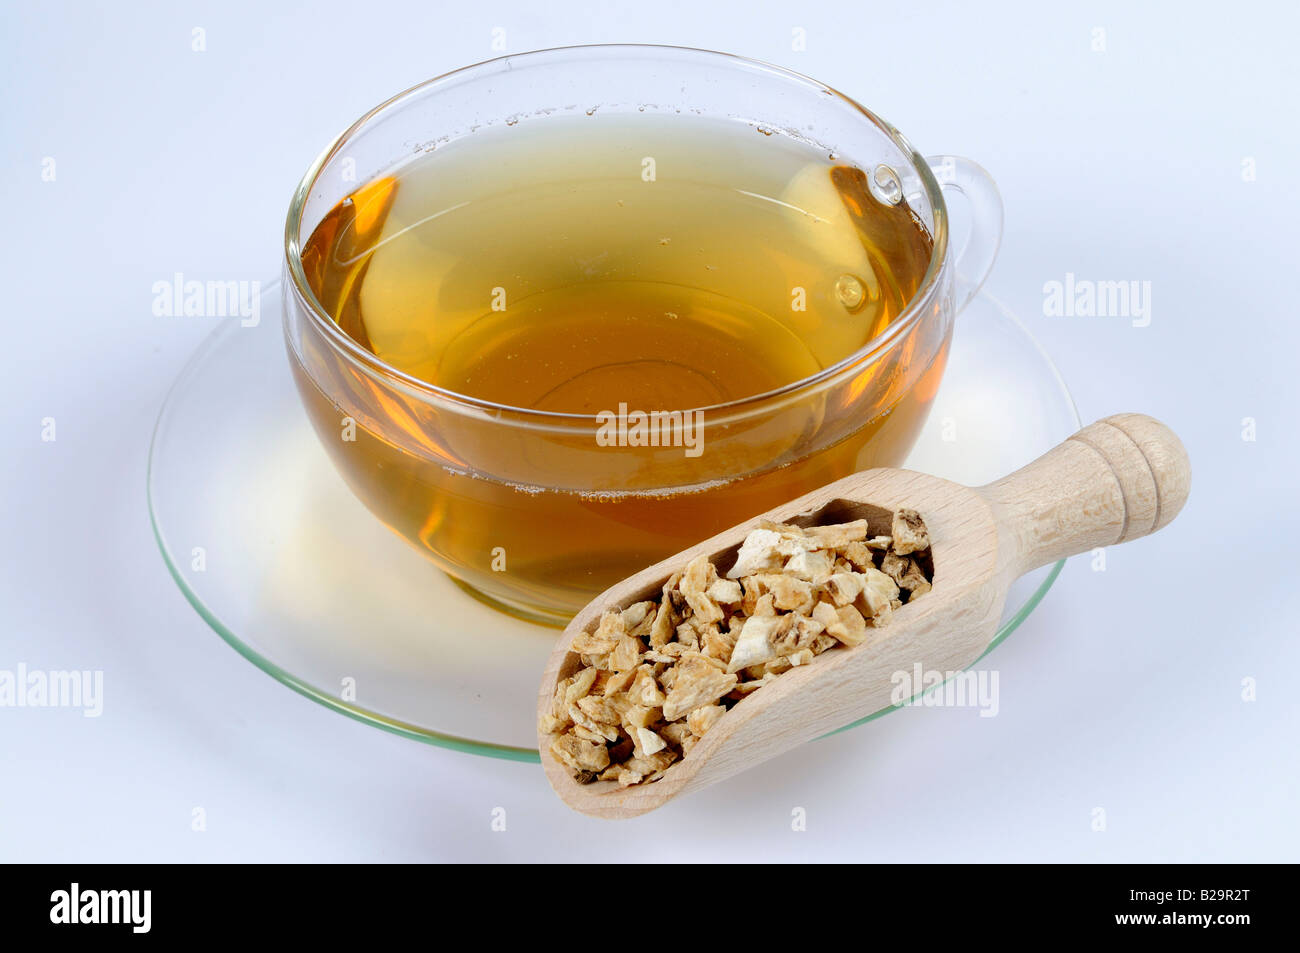 Chinese Angelica / Dang Gui Stock Photo